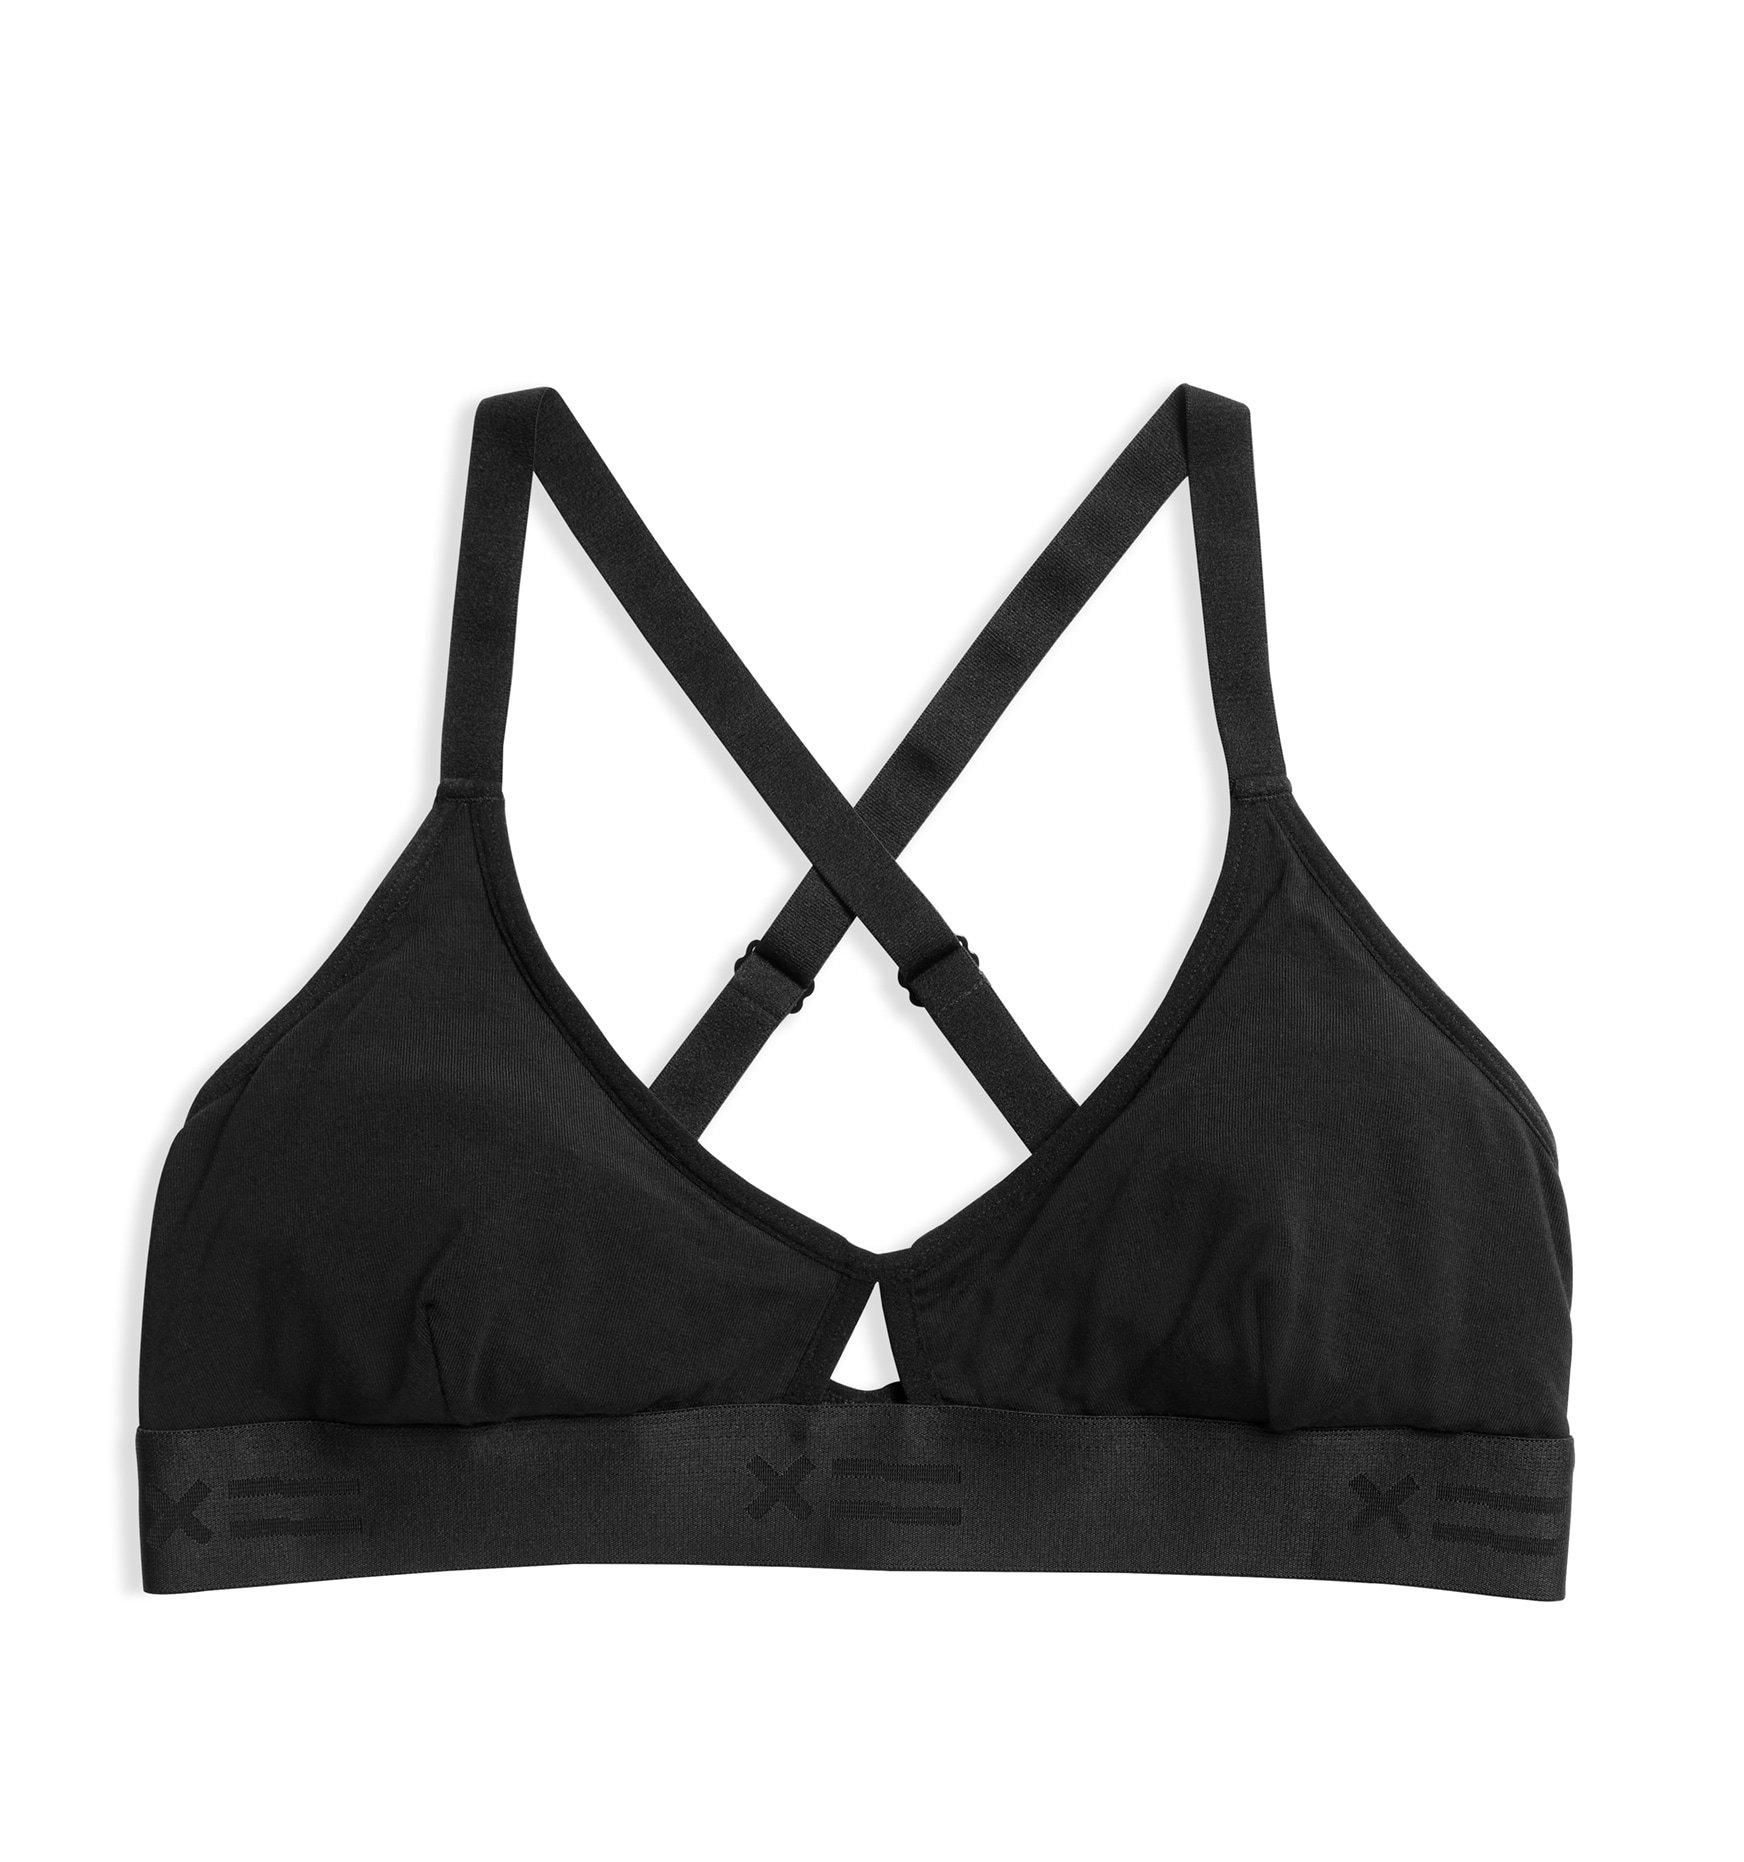 Tomboyx sports bra to the rescue!!! Finally figuring out how to keep the  34Gs in check without binding. I know these photos aren't the best, but can  anyone else see a difference